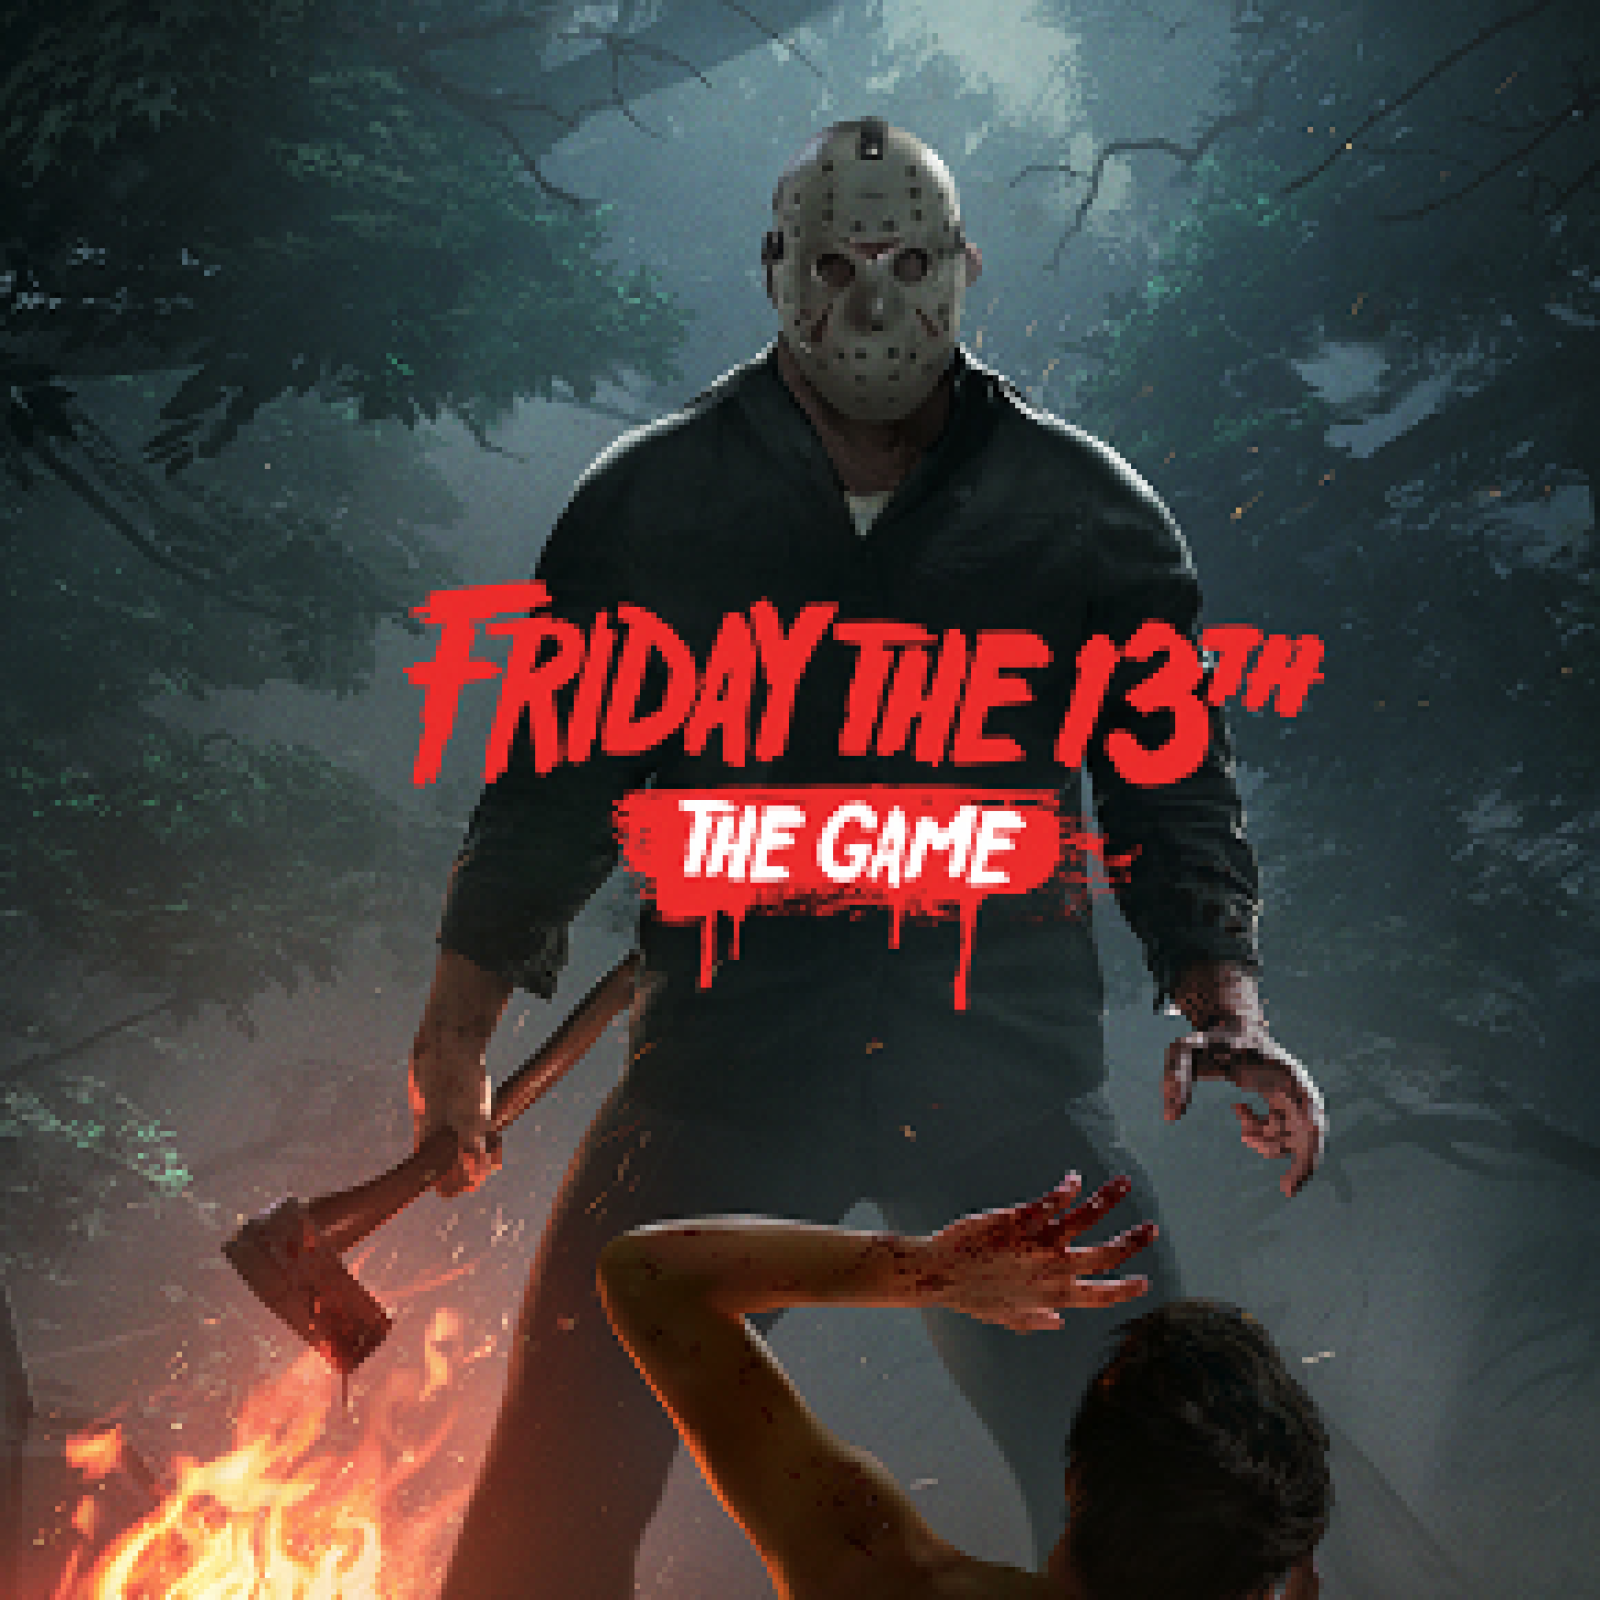 Havoc Games Debuts Friday the 13th Game Start Screen And End